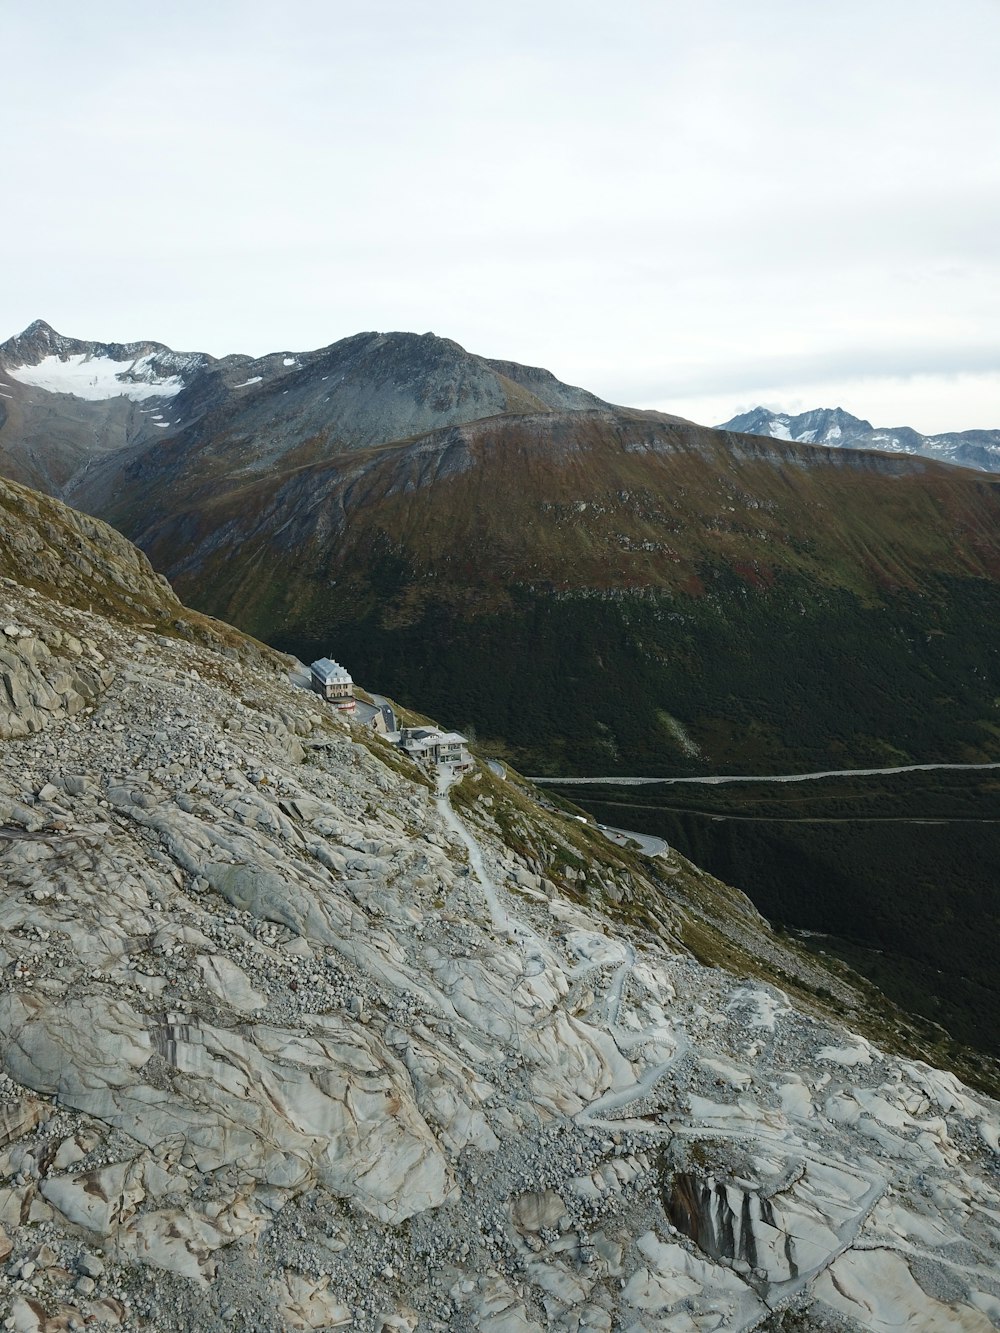 a view of a rocky mountain with a cable running through it